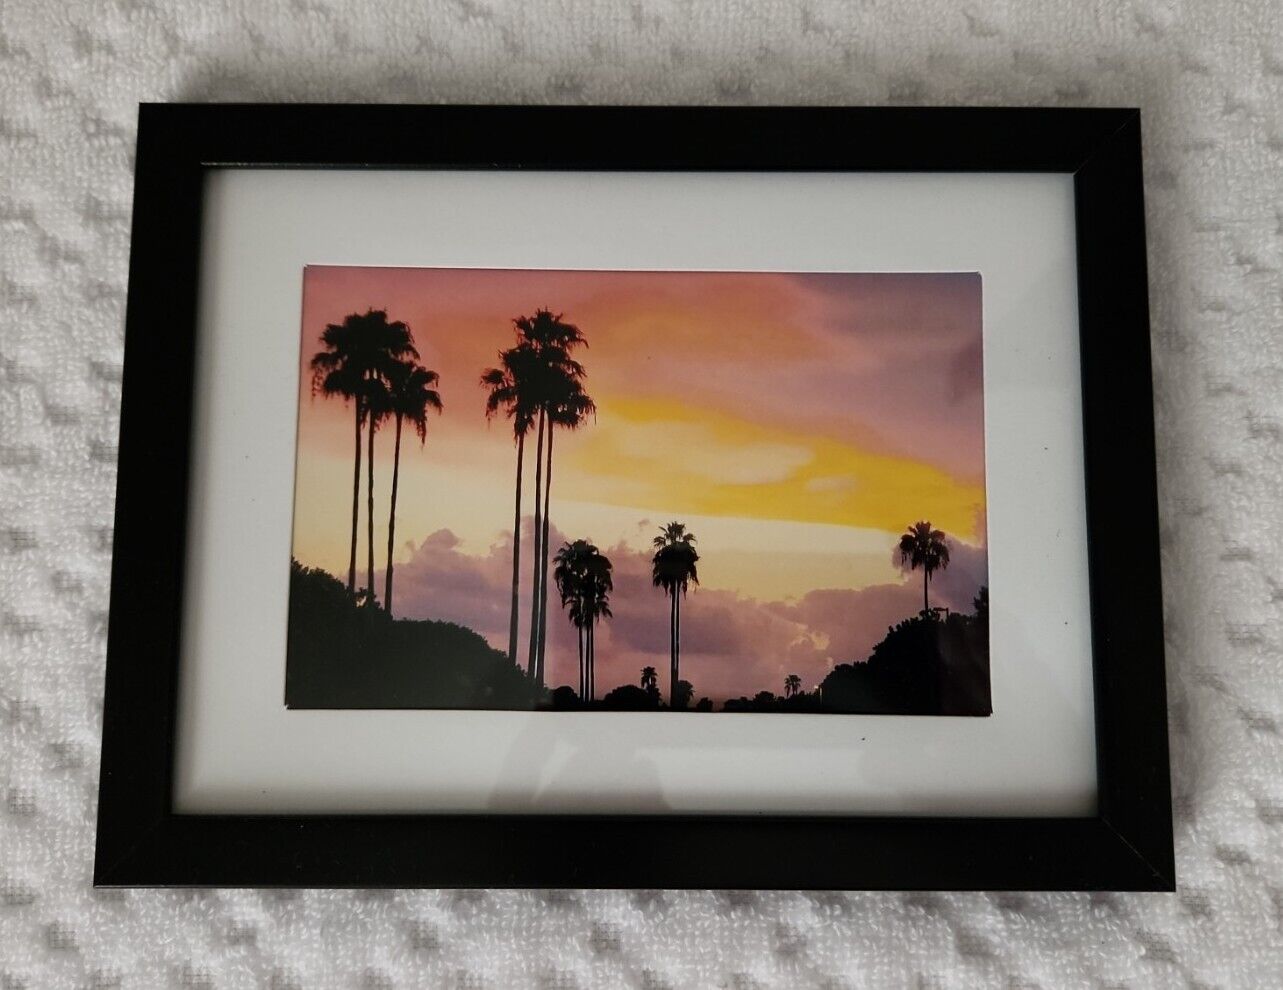 Tropical Sunset Picture, 4 X 6 in Black Frame, Kissimmee FL, with Palm Trees